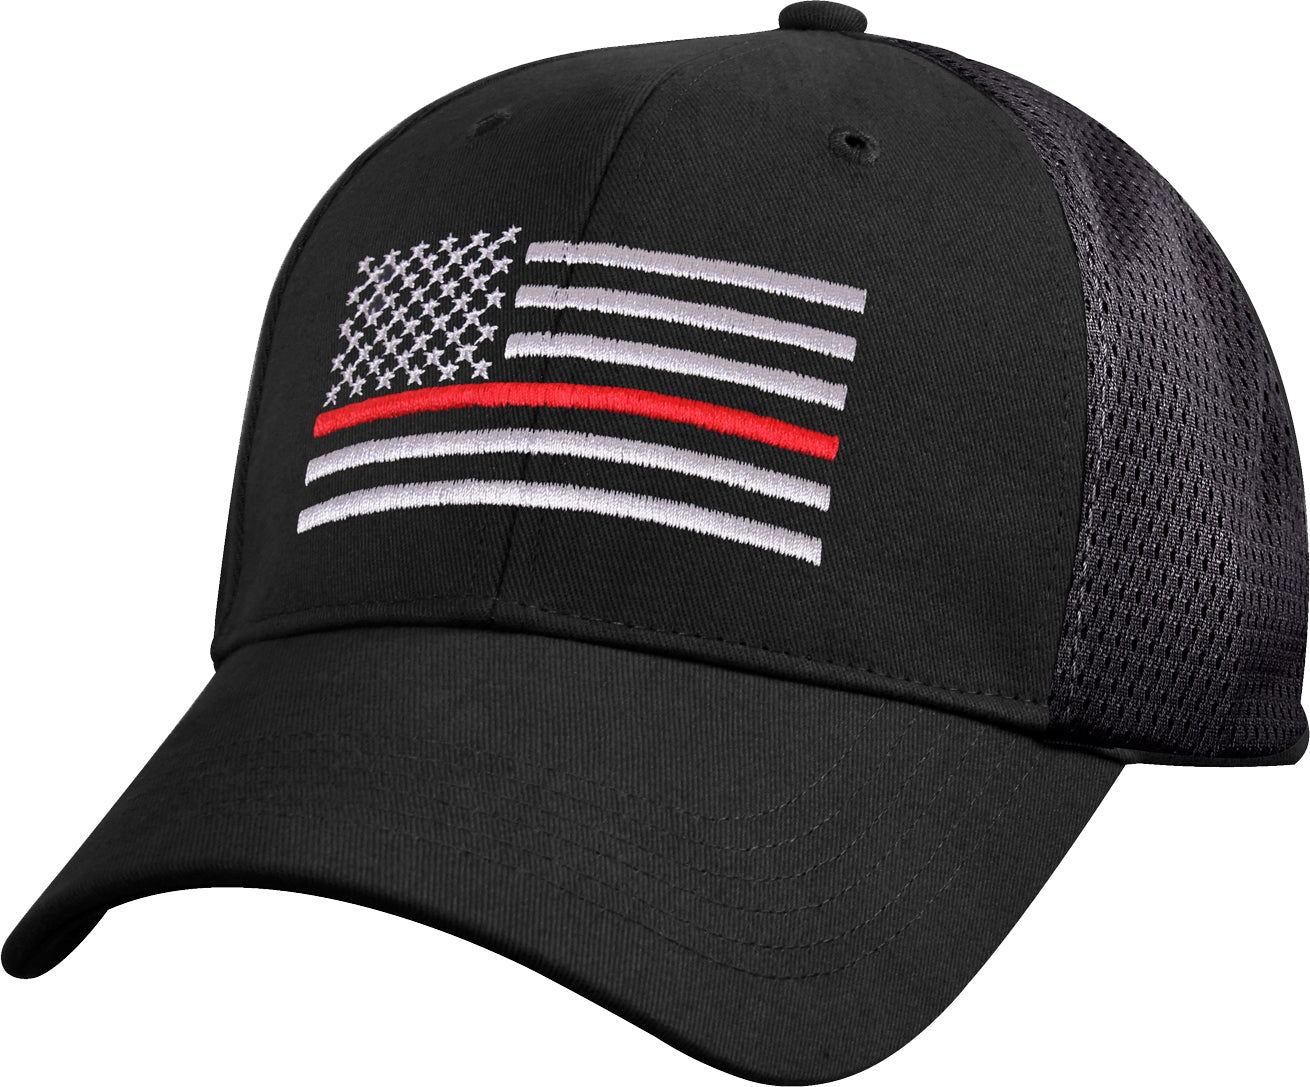 Black - Thin Red Line Mesh Back Tactical Cap